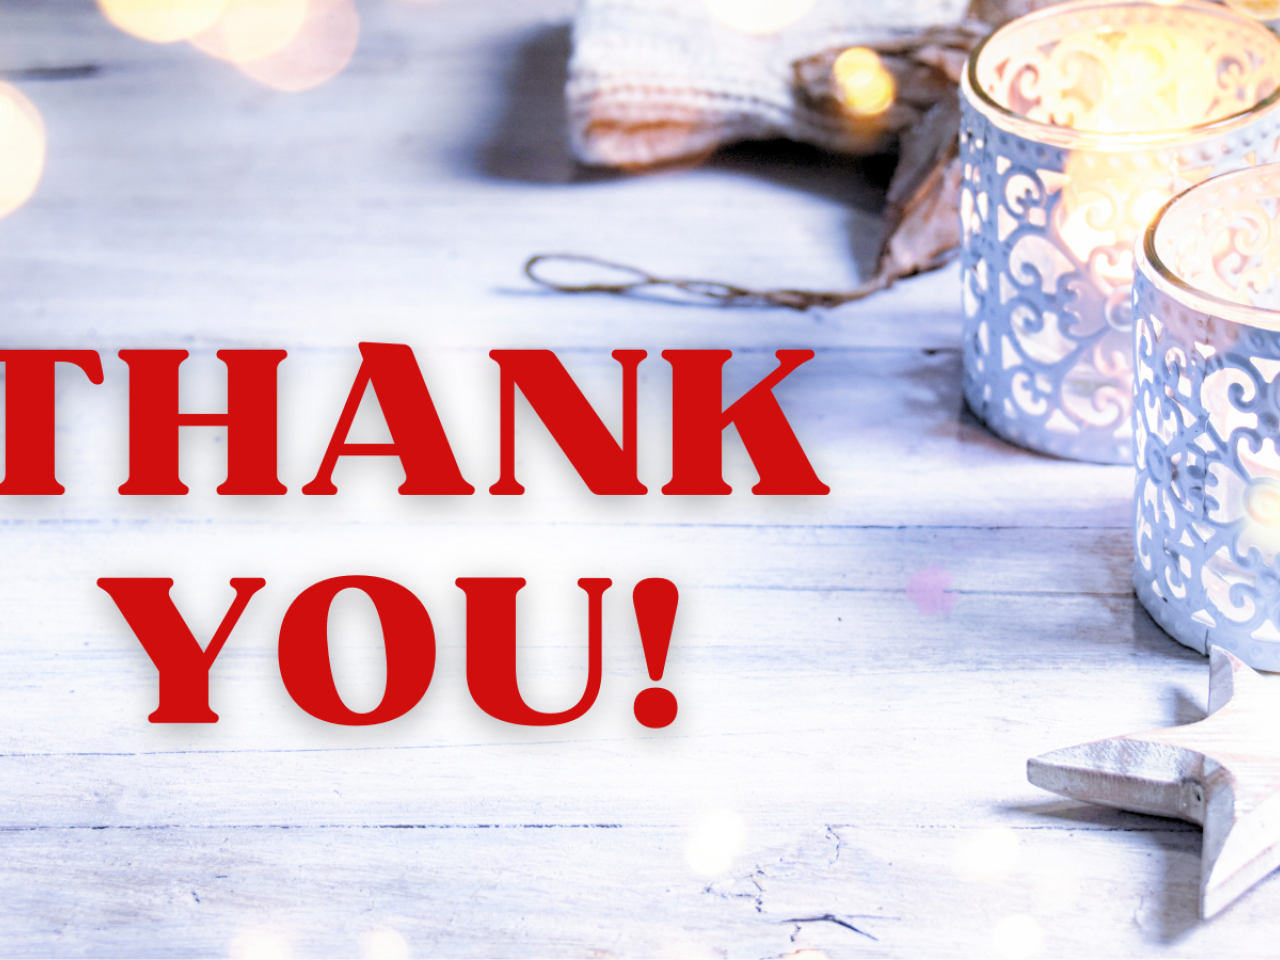 Thank you text over whitewashed wood background with white candles and star ornament